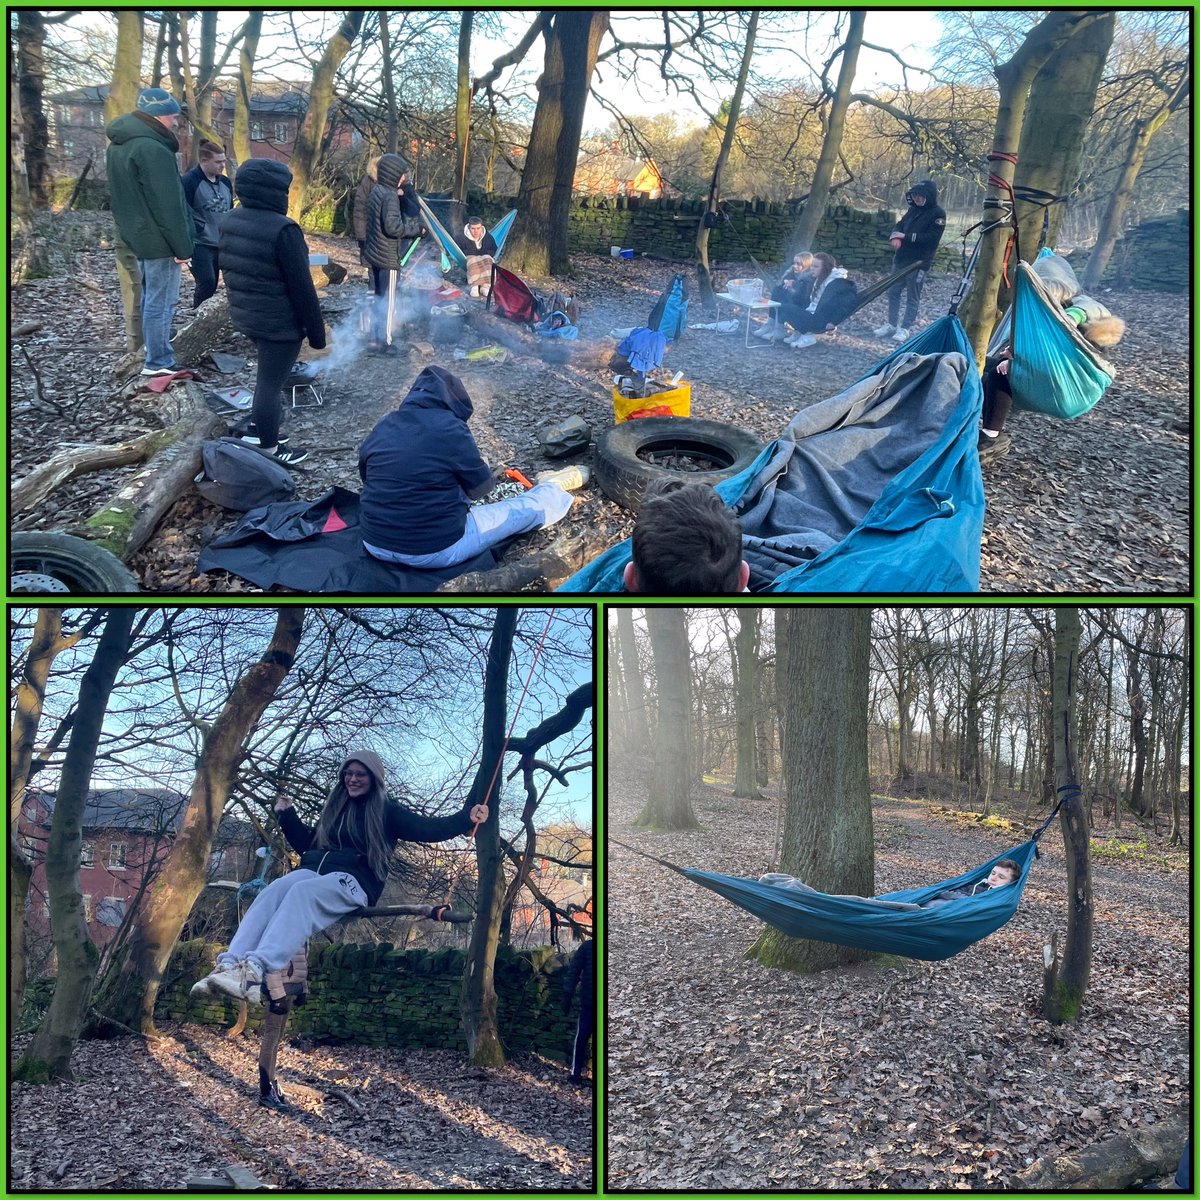 Students @EthosCollegeUK wrapped up for freezing forest school days ☃️❄️ #SEMH #Resilience #happy #winter #teambuilding